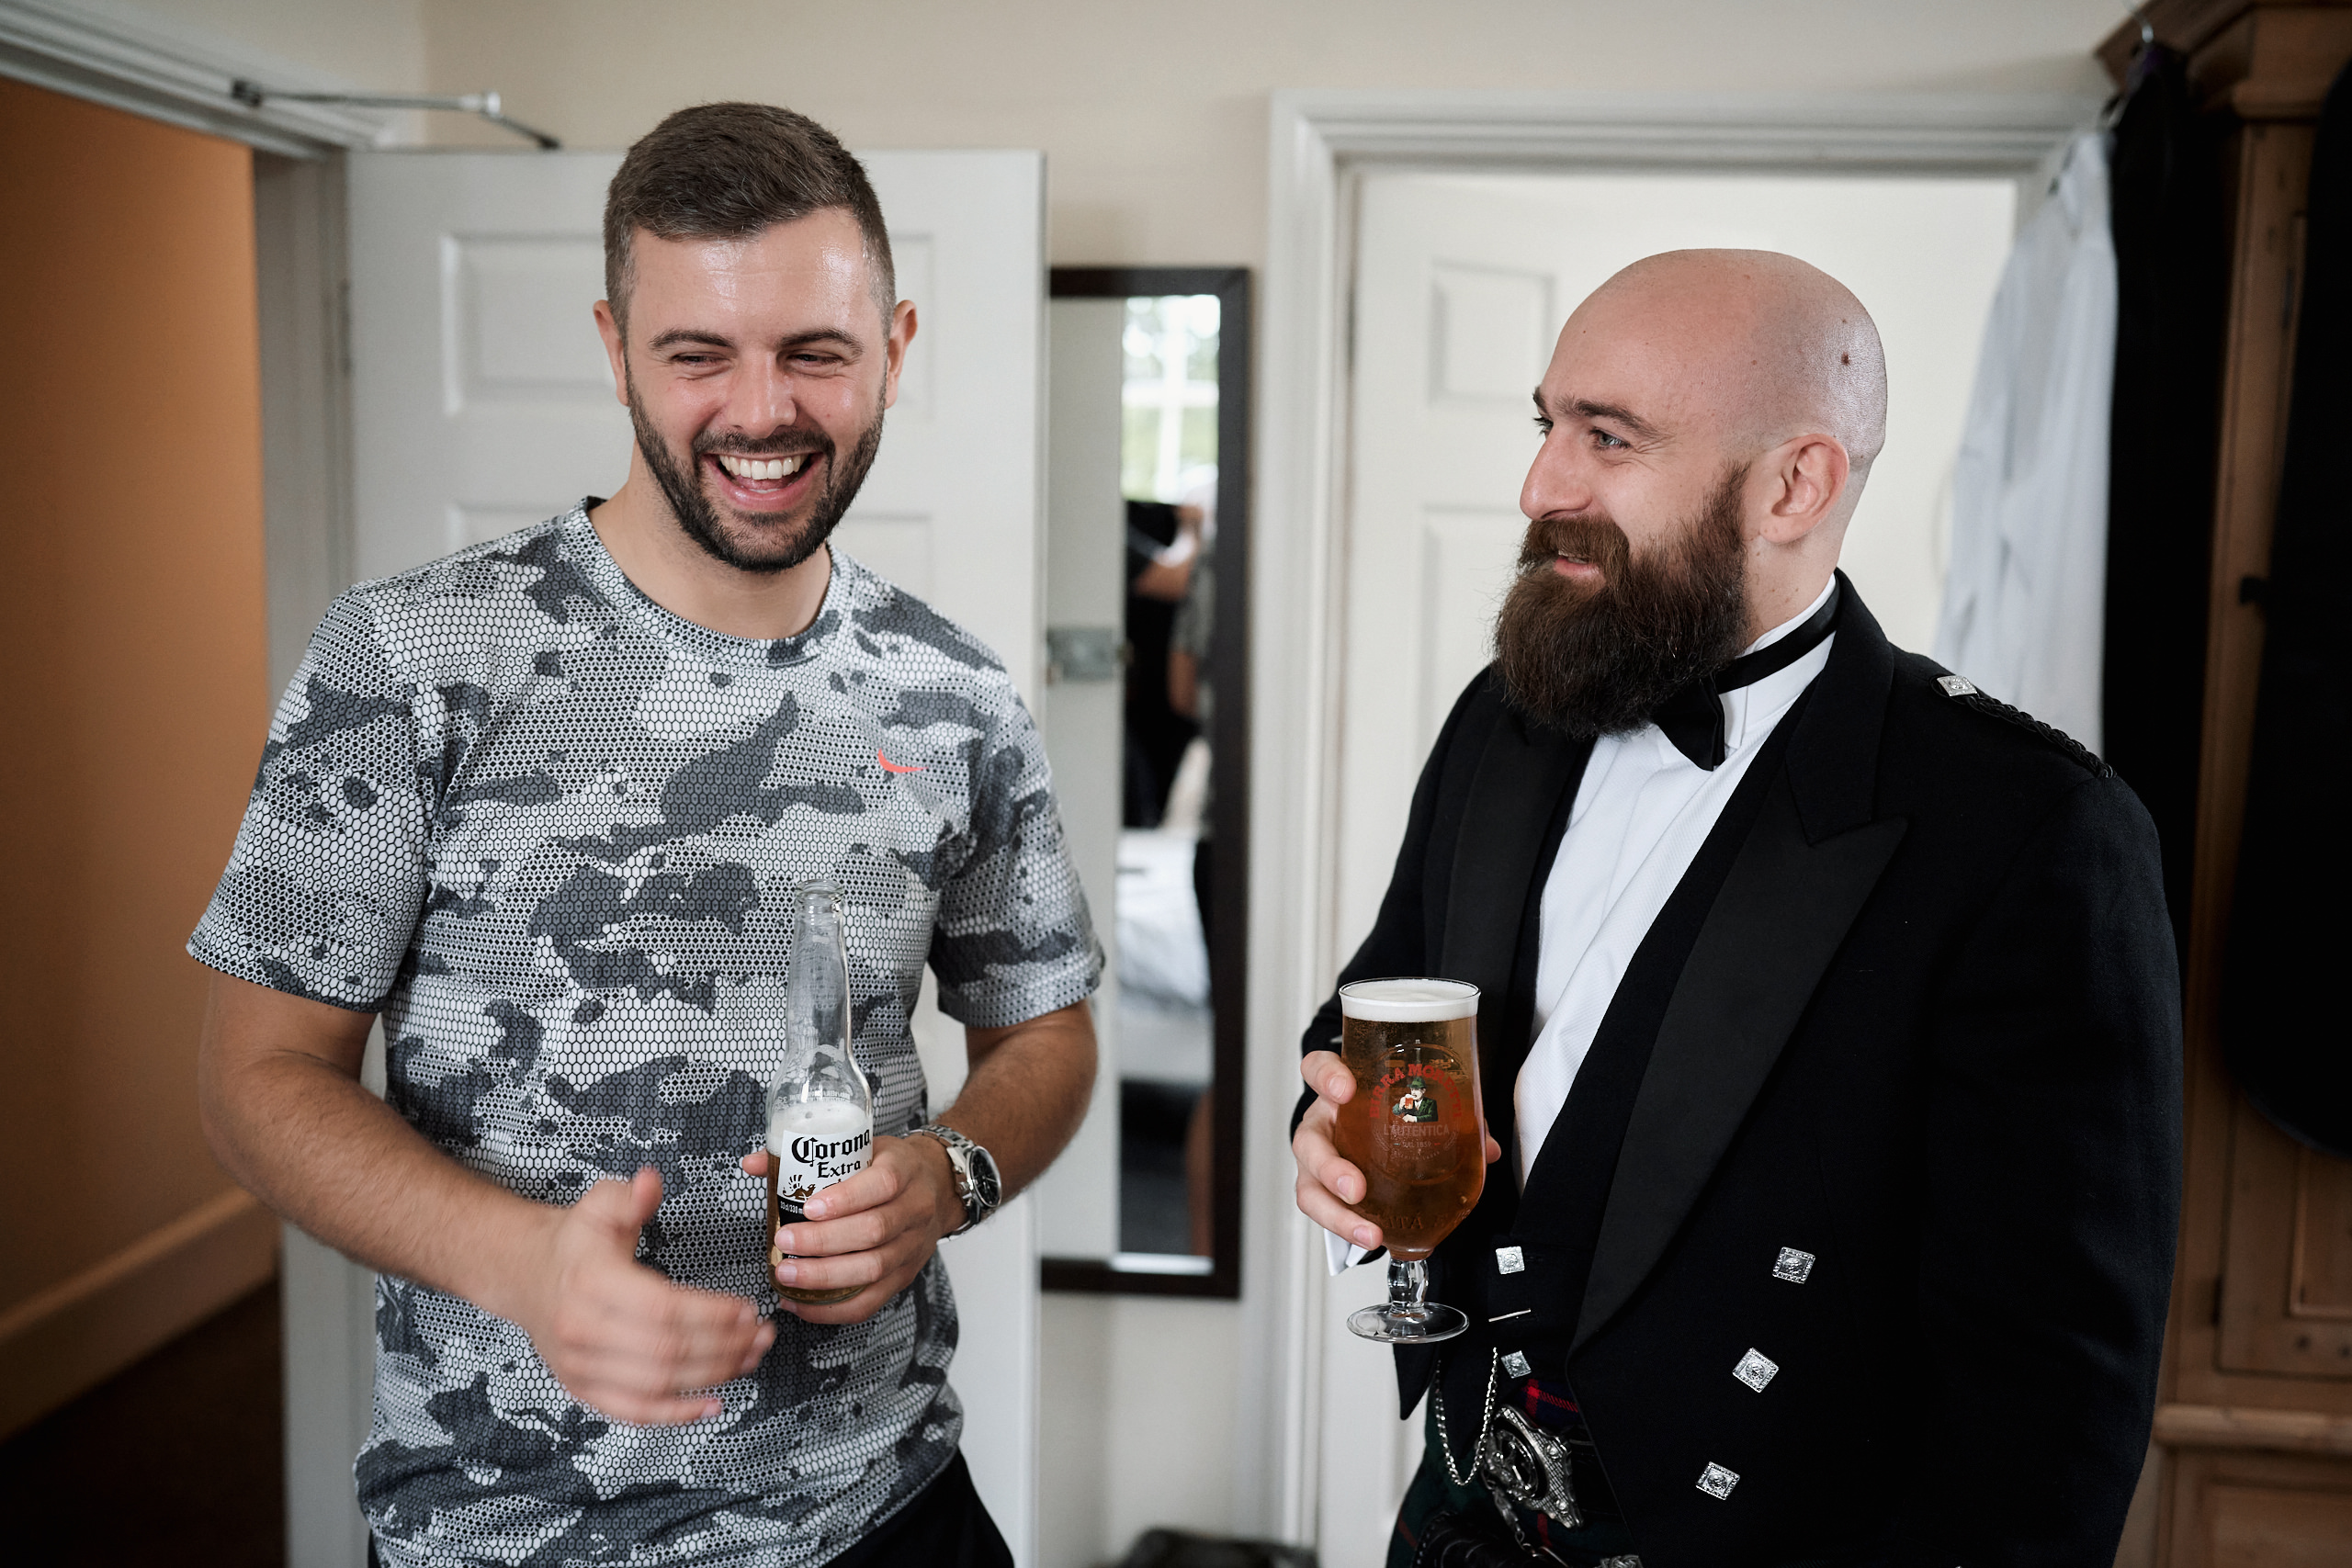 A man in a tuxedo and a man in a kilt.